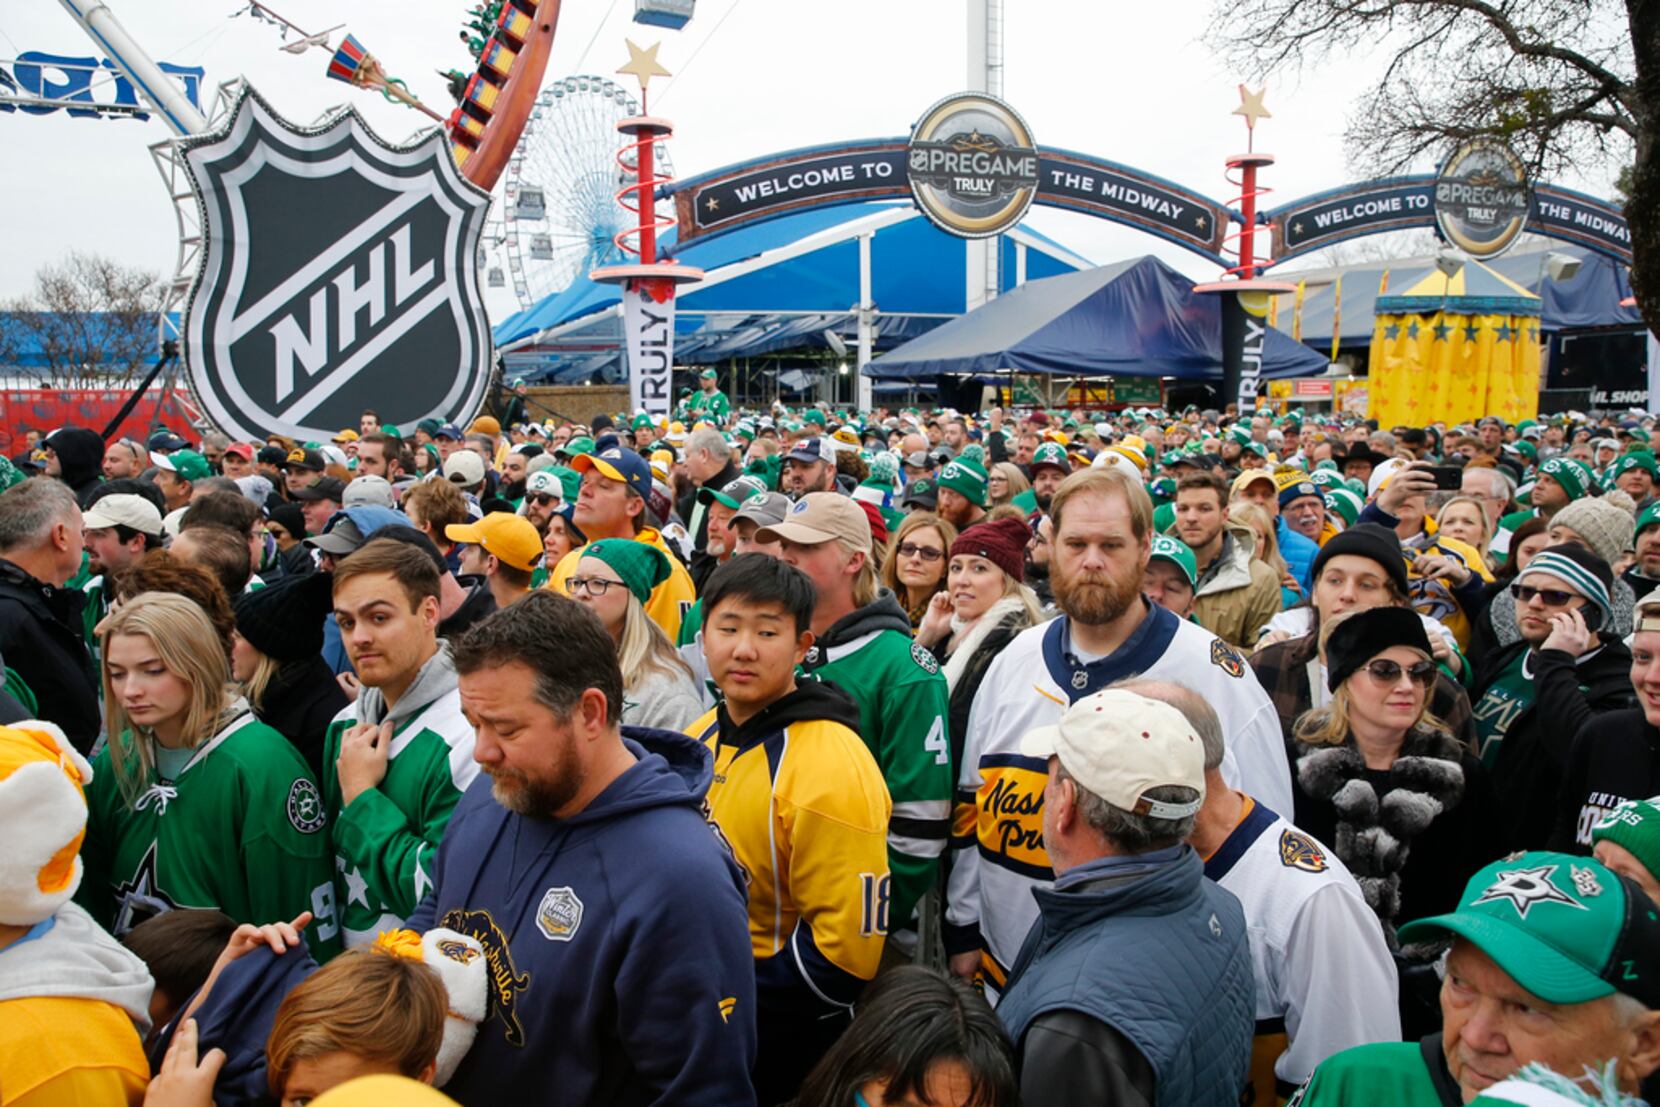 Report: Winter Classic turns into TV ratings dud